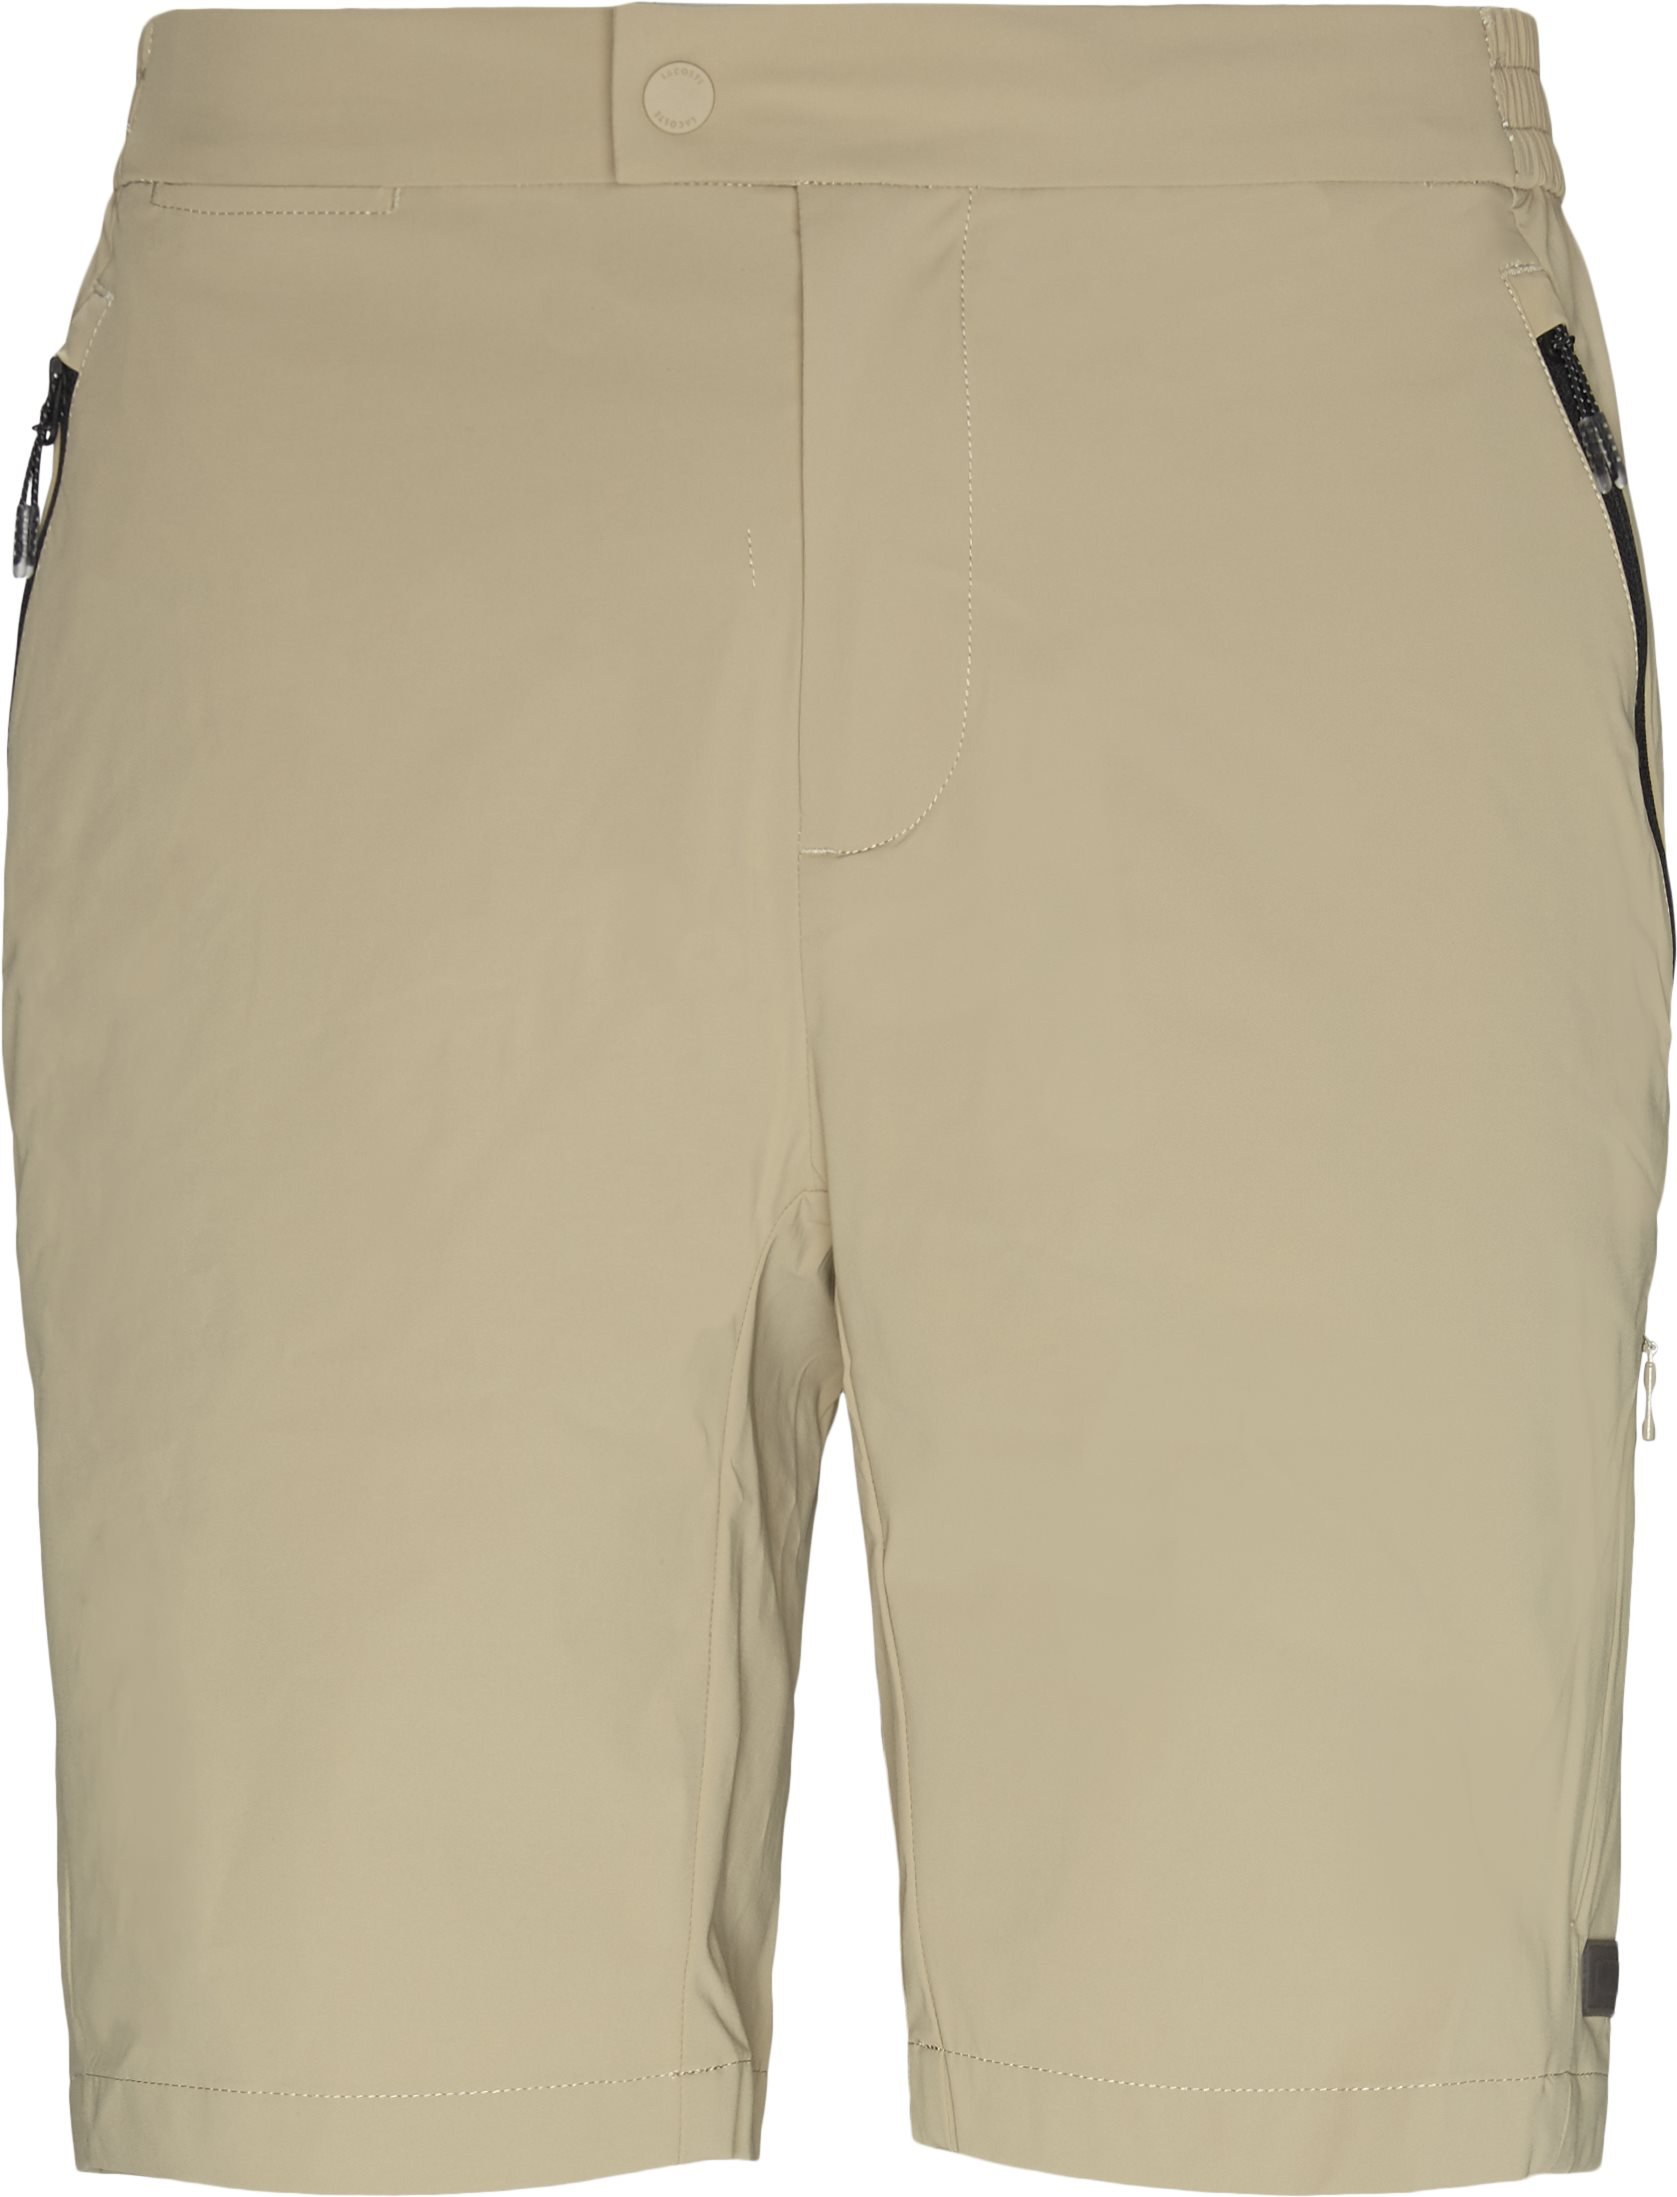 Lacoste Shorts FH5545 Sand